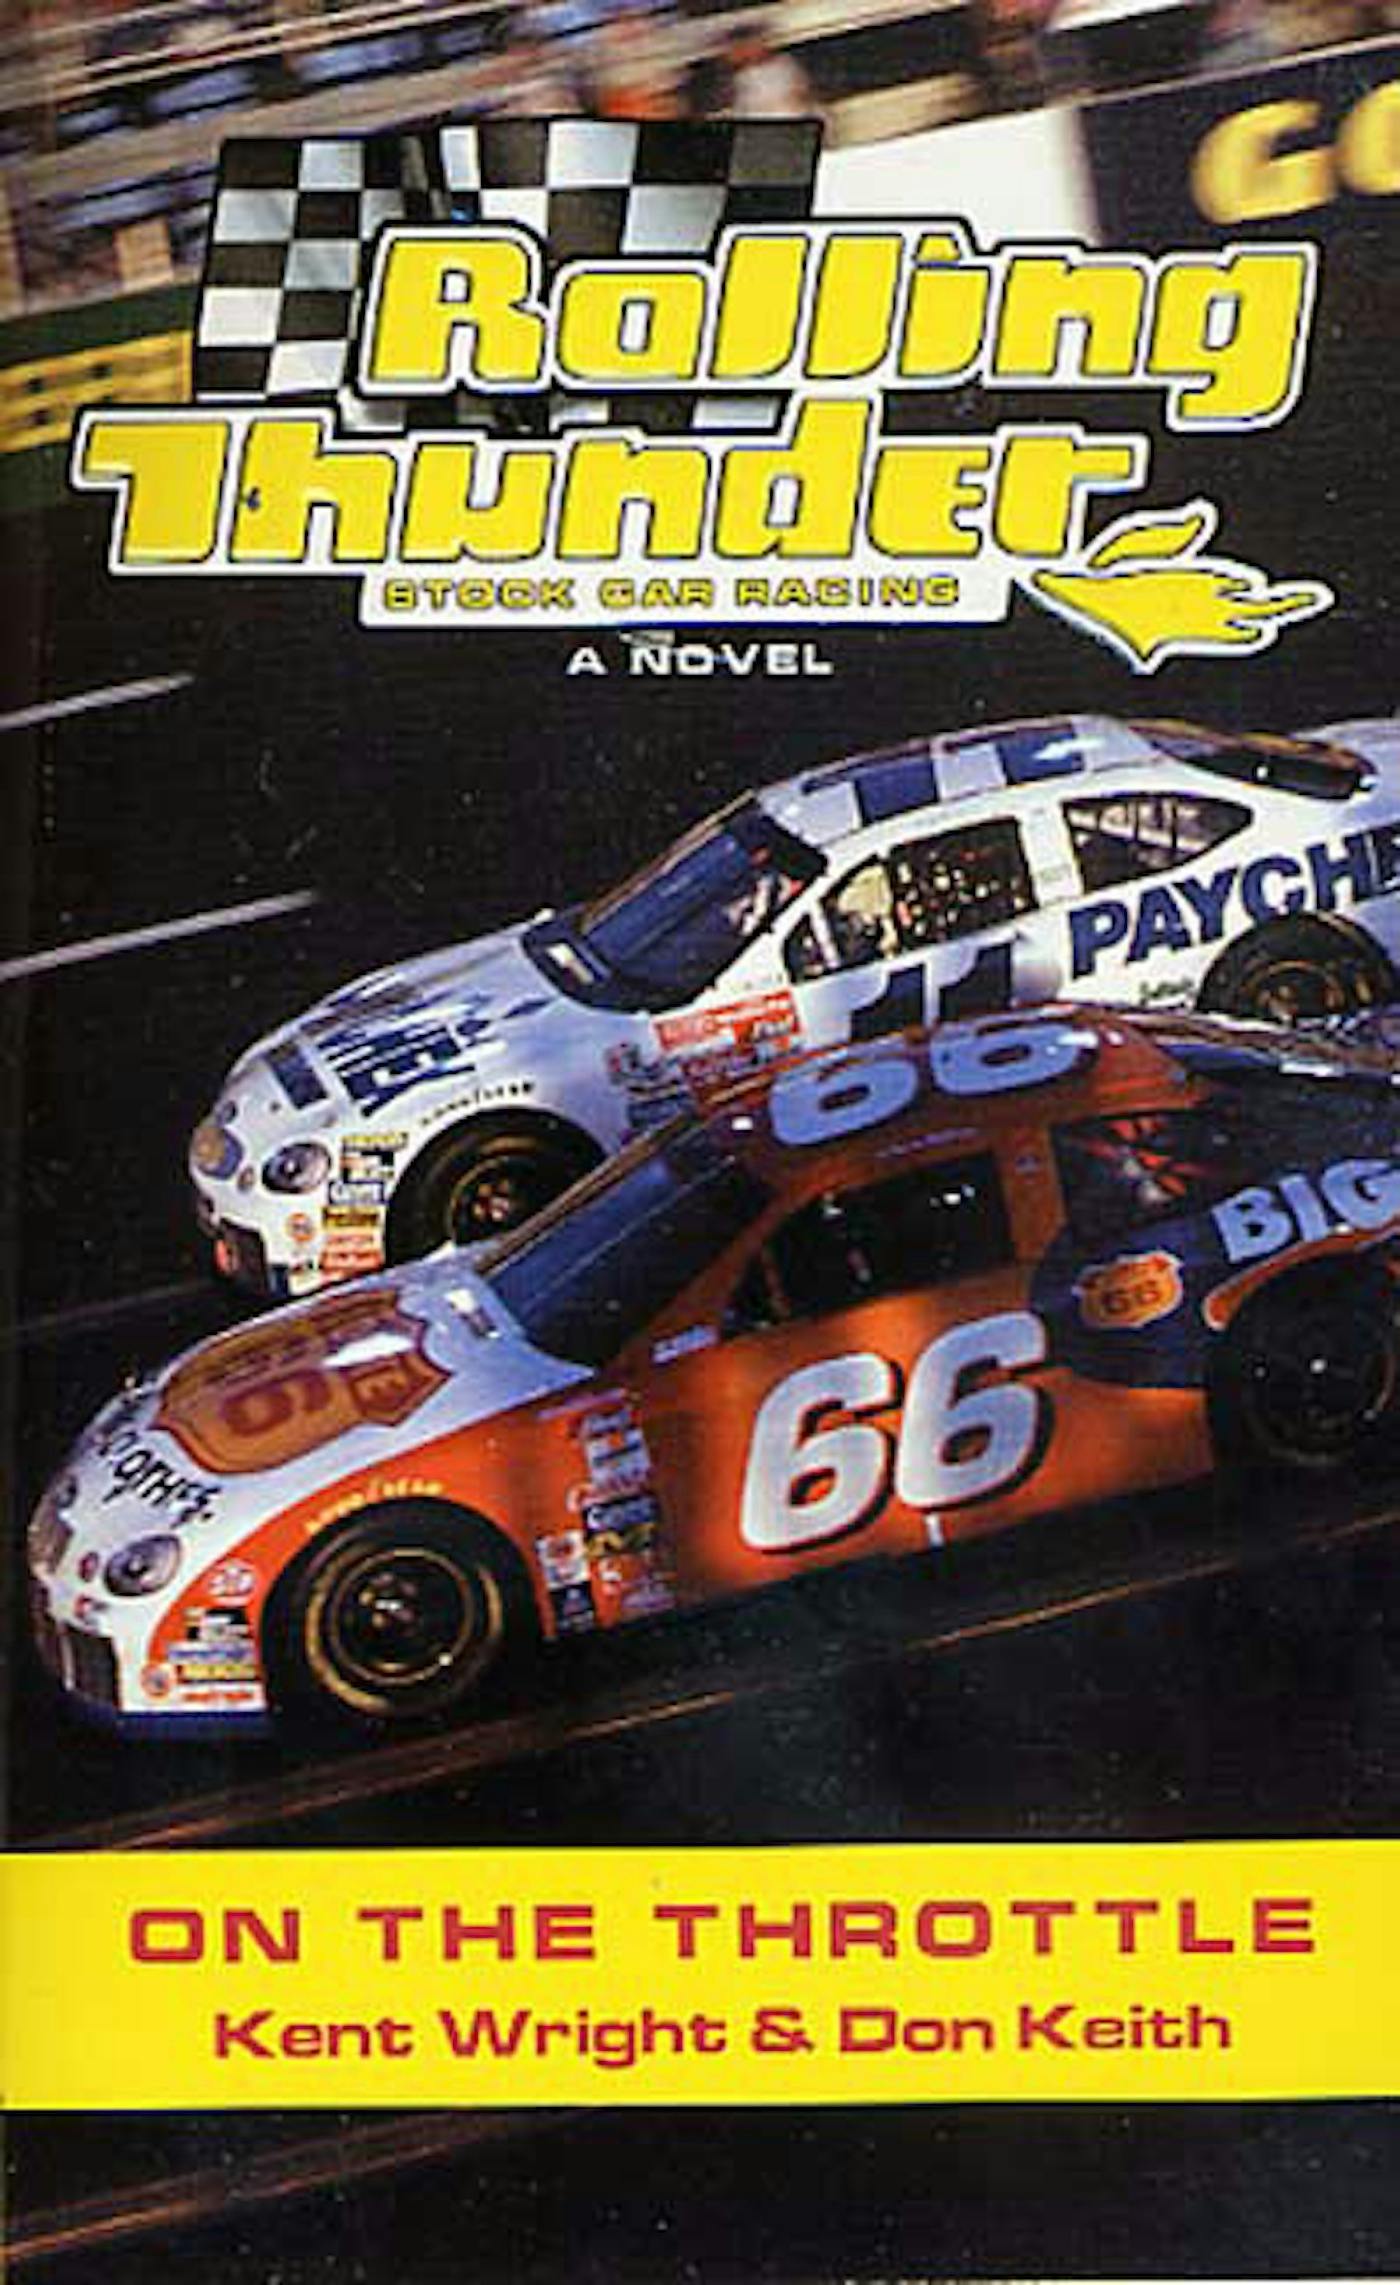 Image of Rolling Thunder Stock Car Racing: On The Throttle